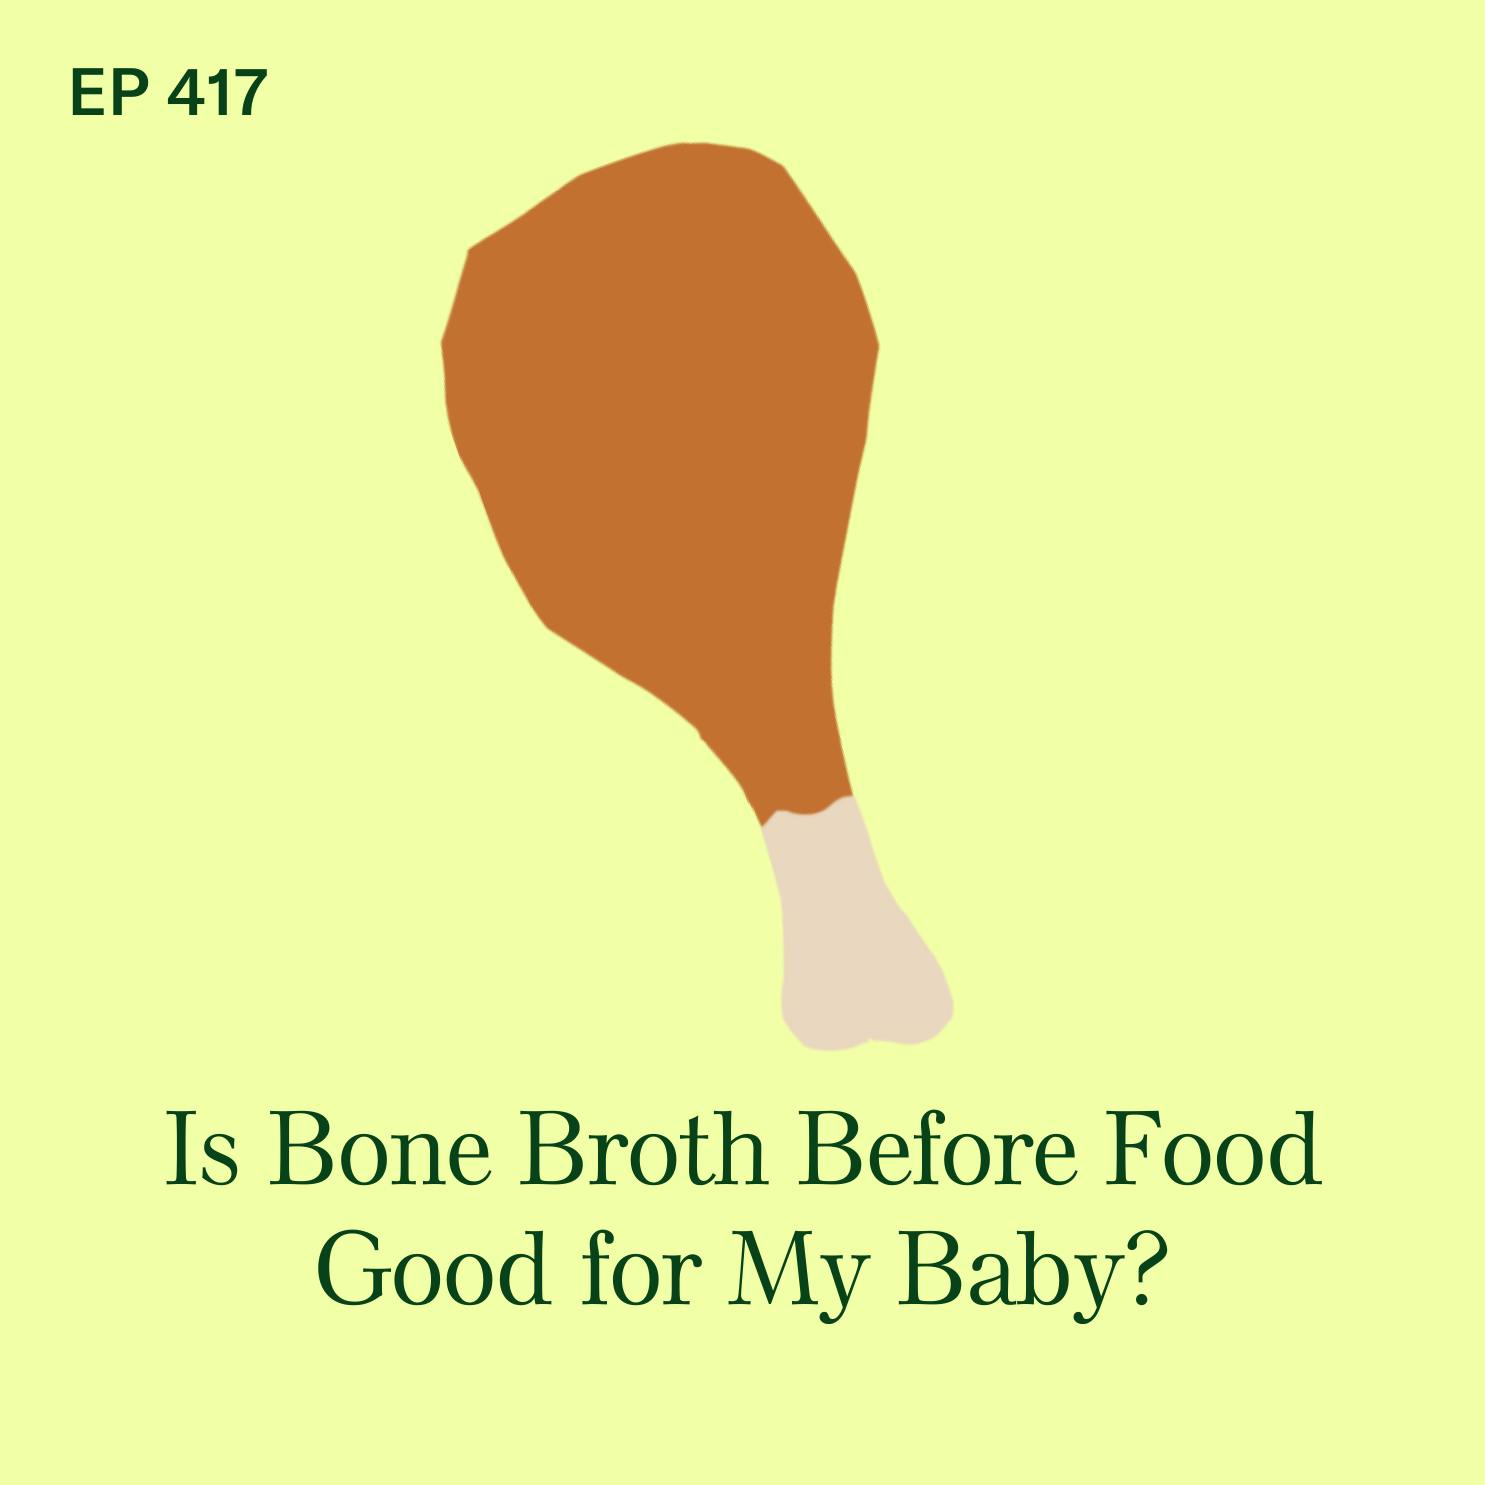 Is Bone Broth Before Food Good for My Baby?